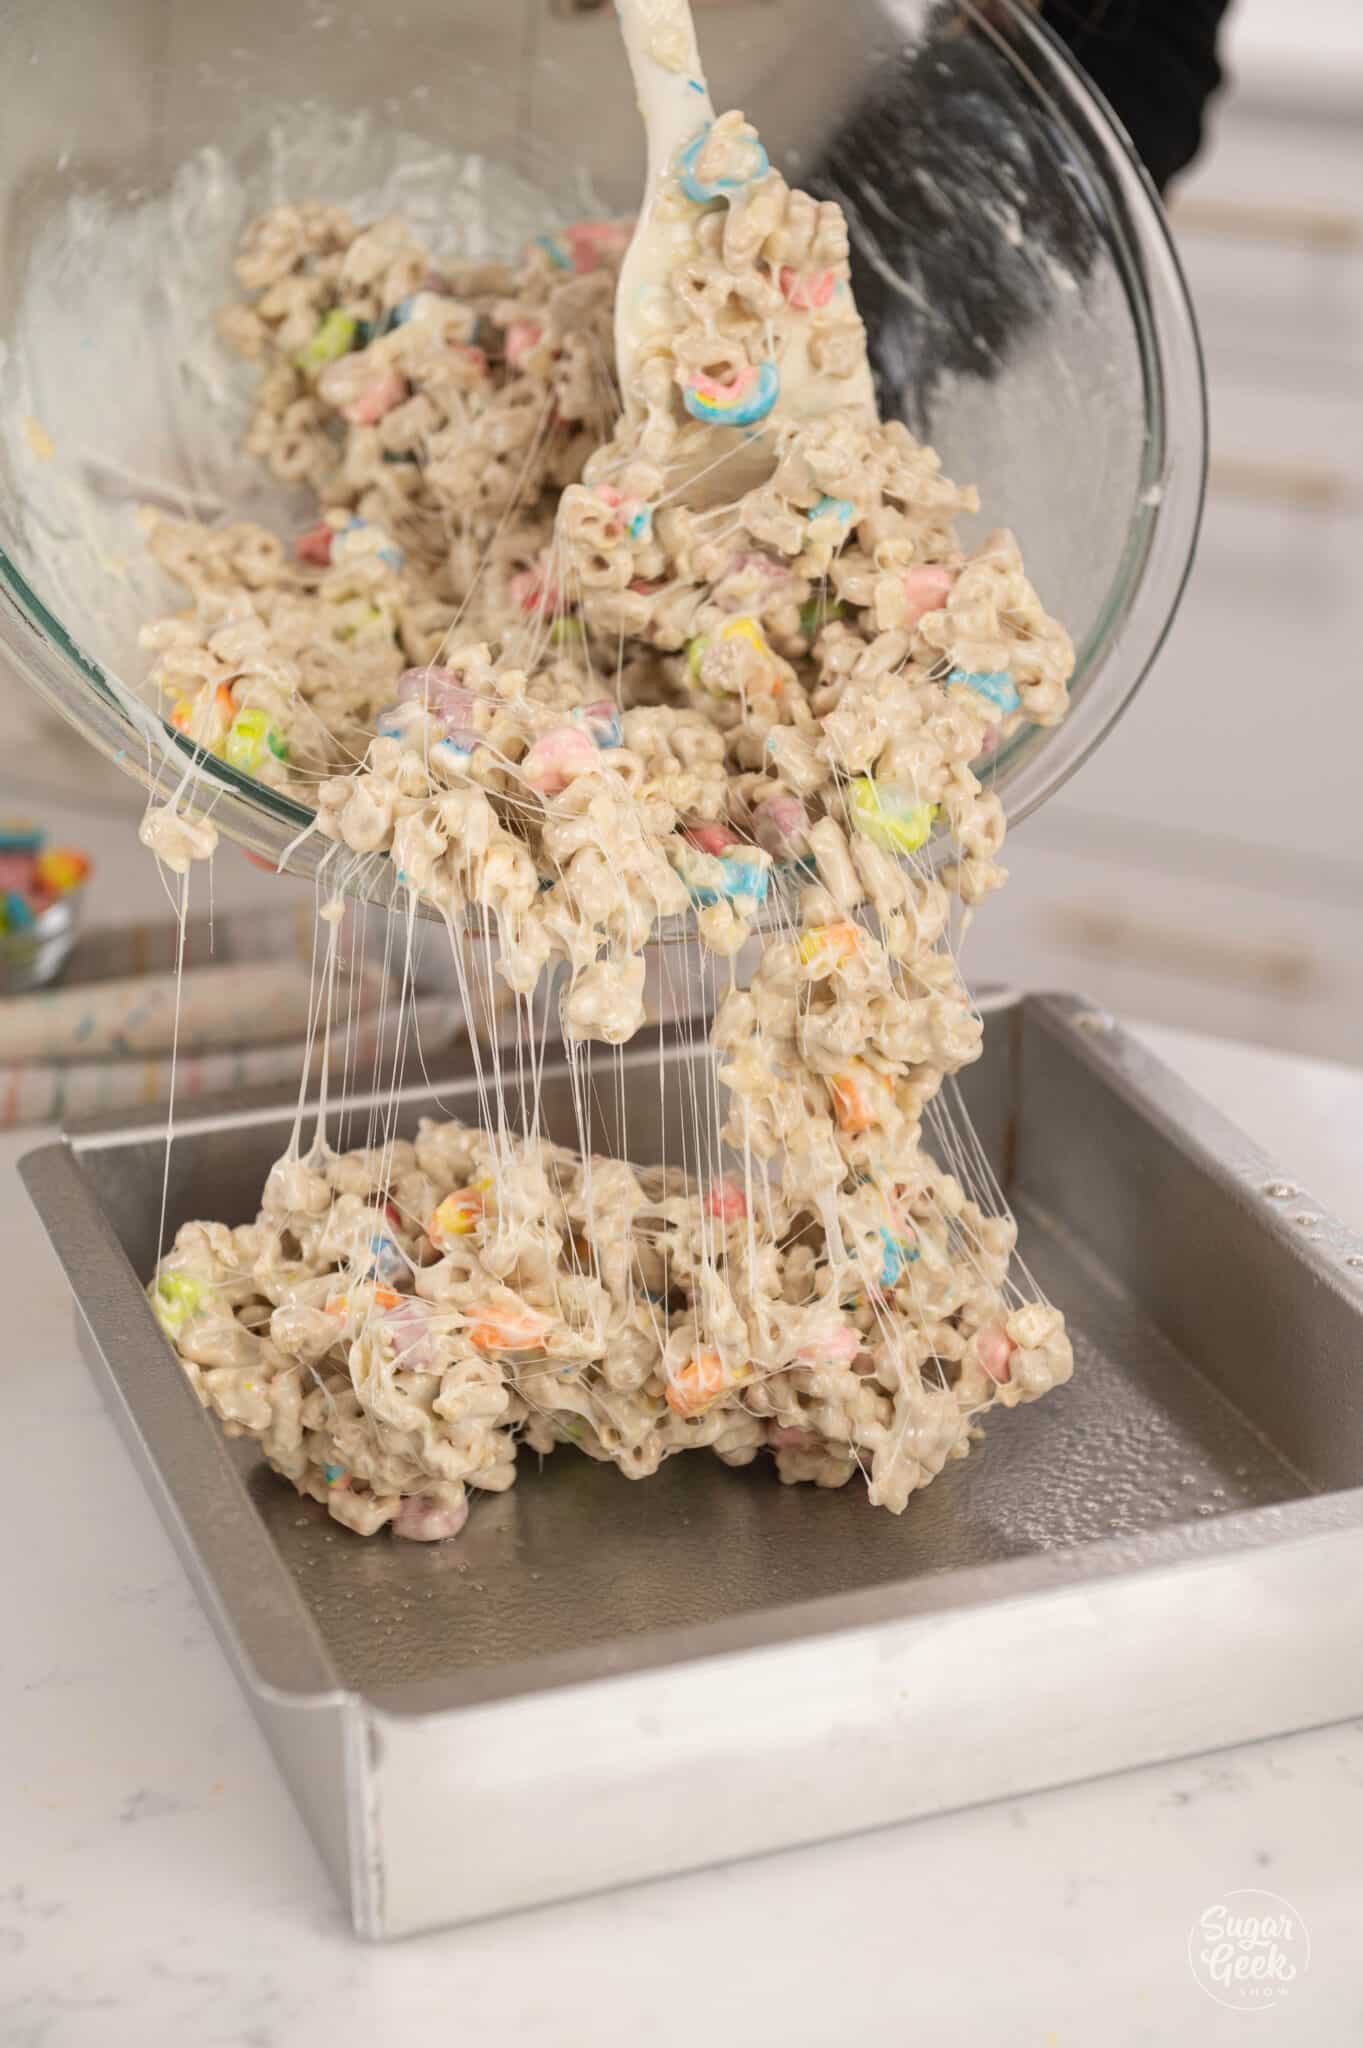 a bowl of cereal treat mixture pouring into a baking dish